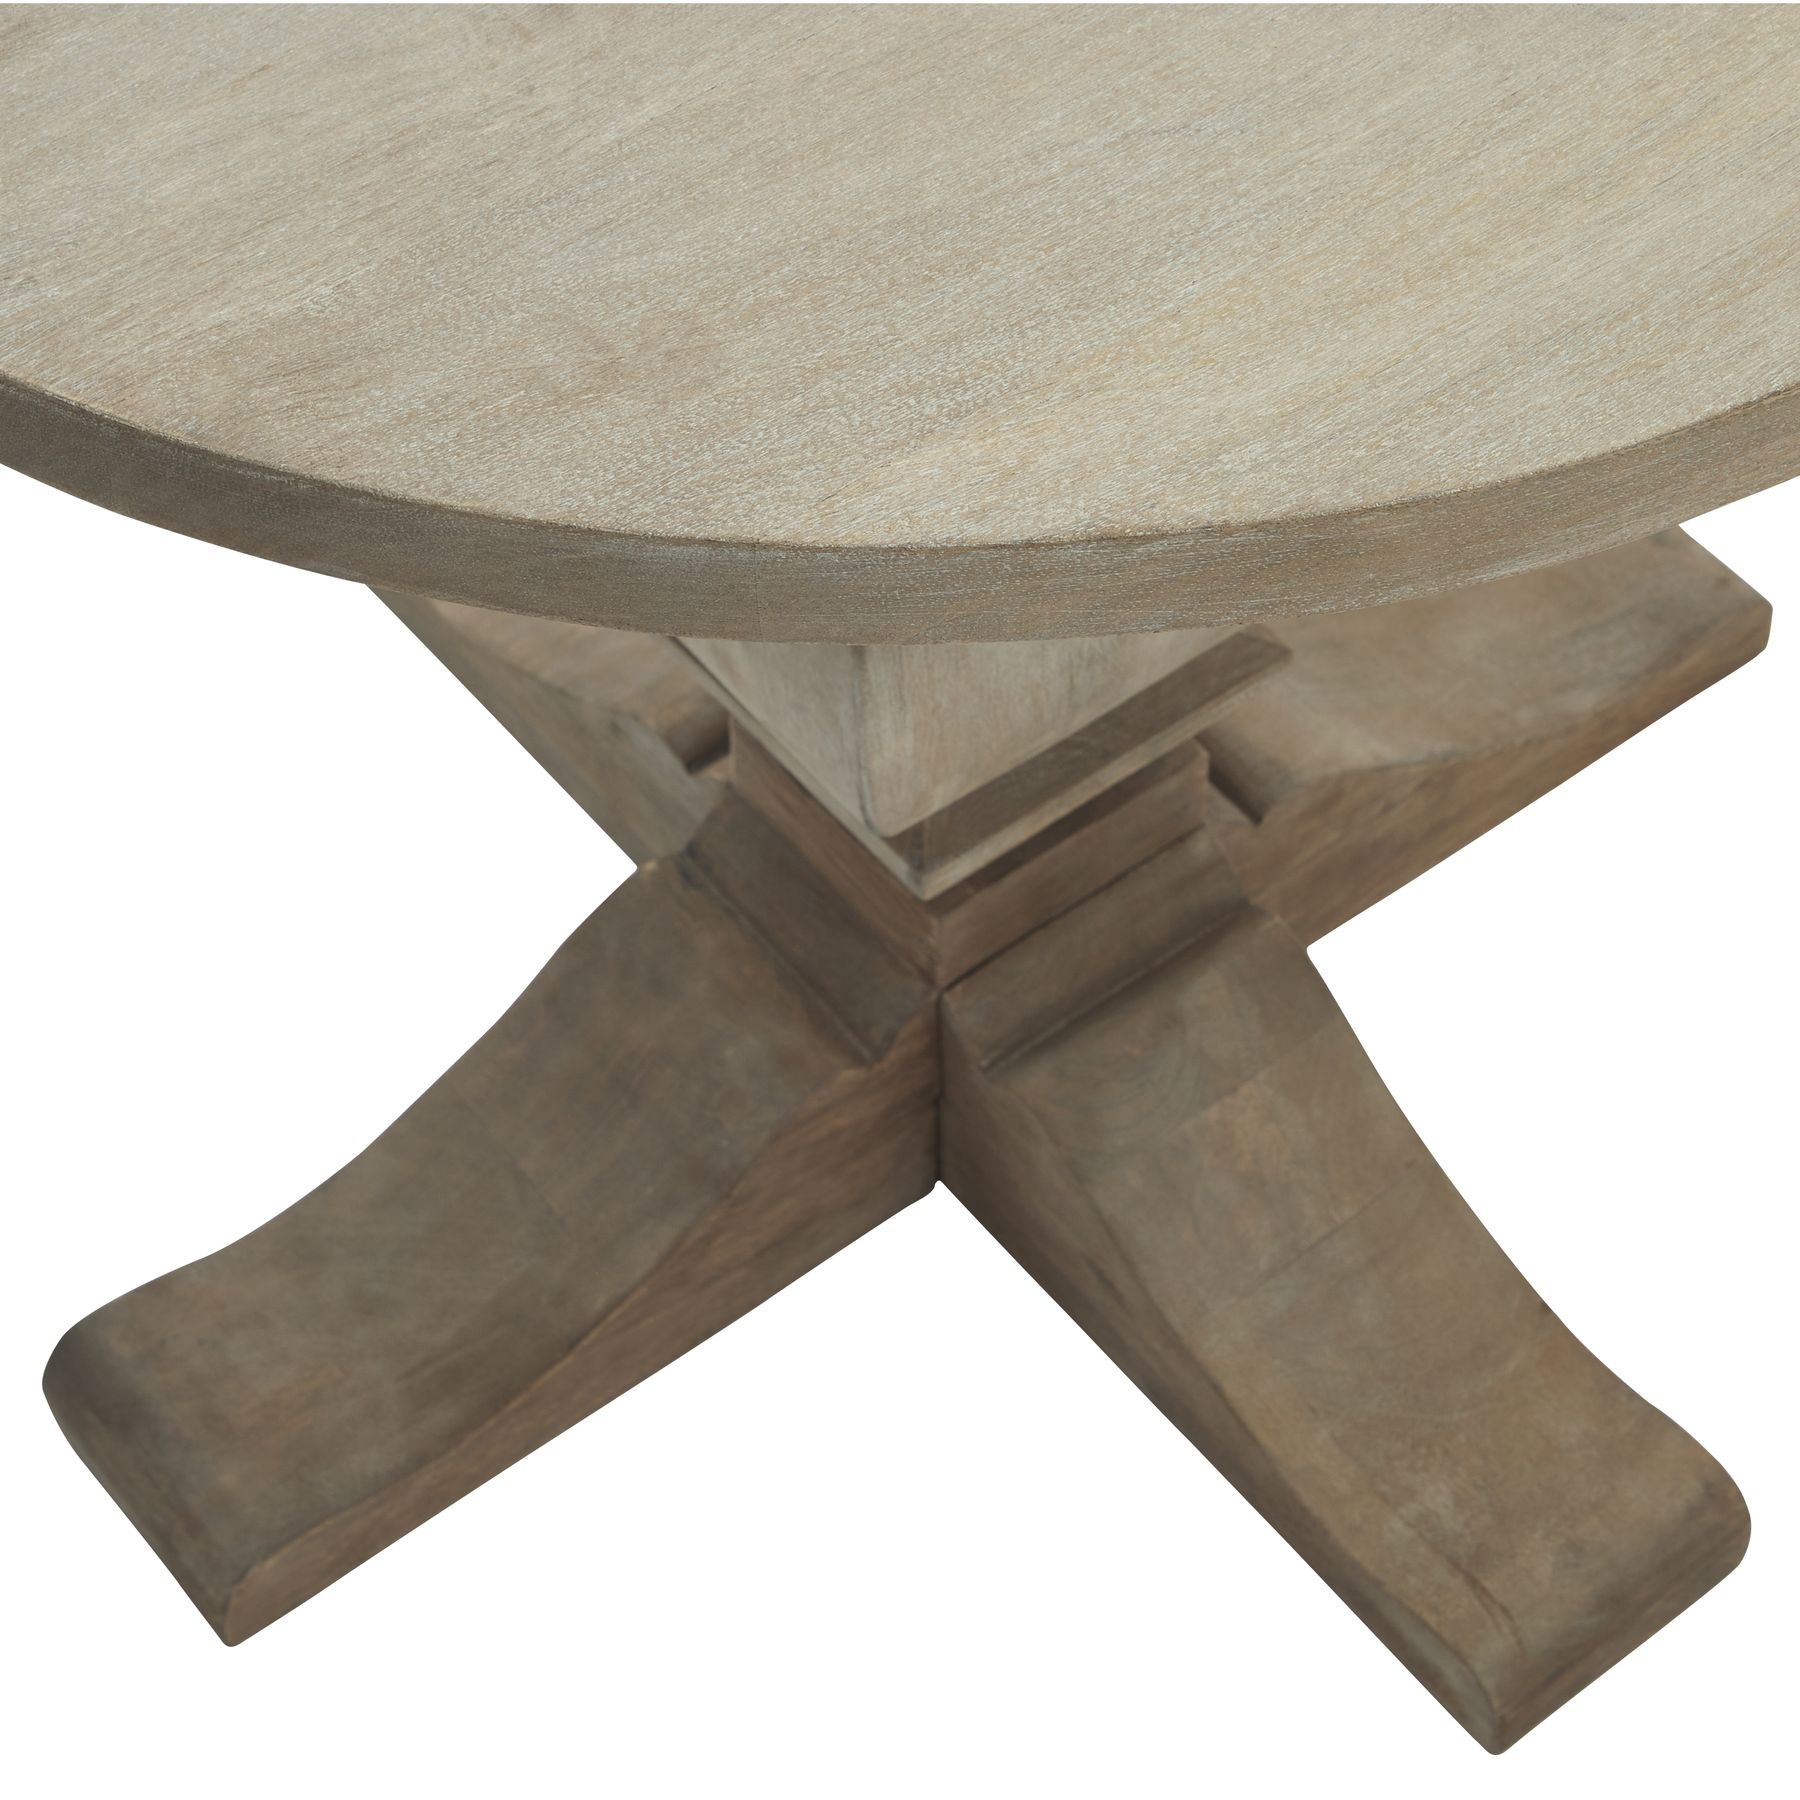 Copgrove Collection Pedestal Side Table - Image 2